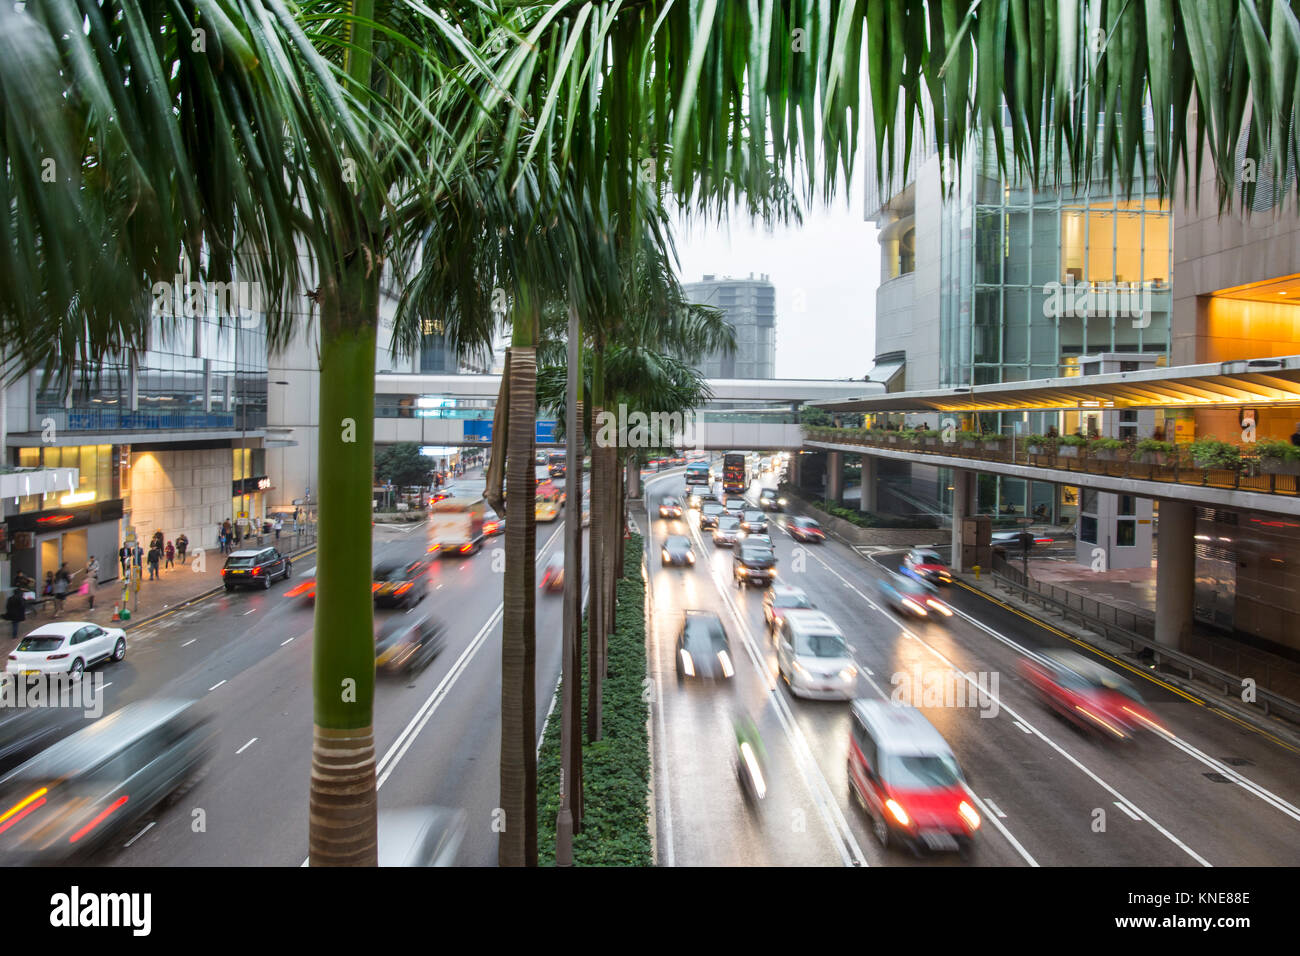 The view of the traffic on the streets of Hong Kong Islands Stock Photo